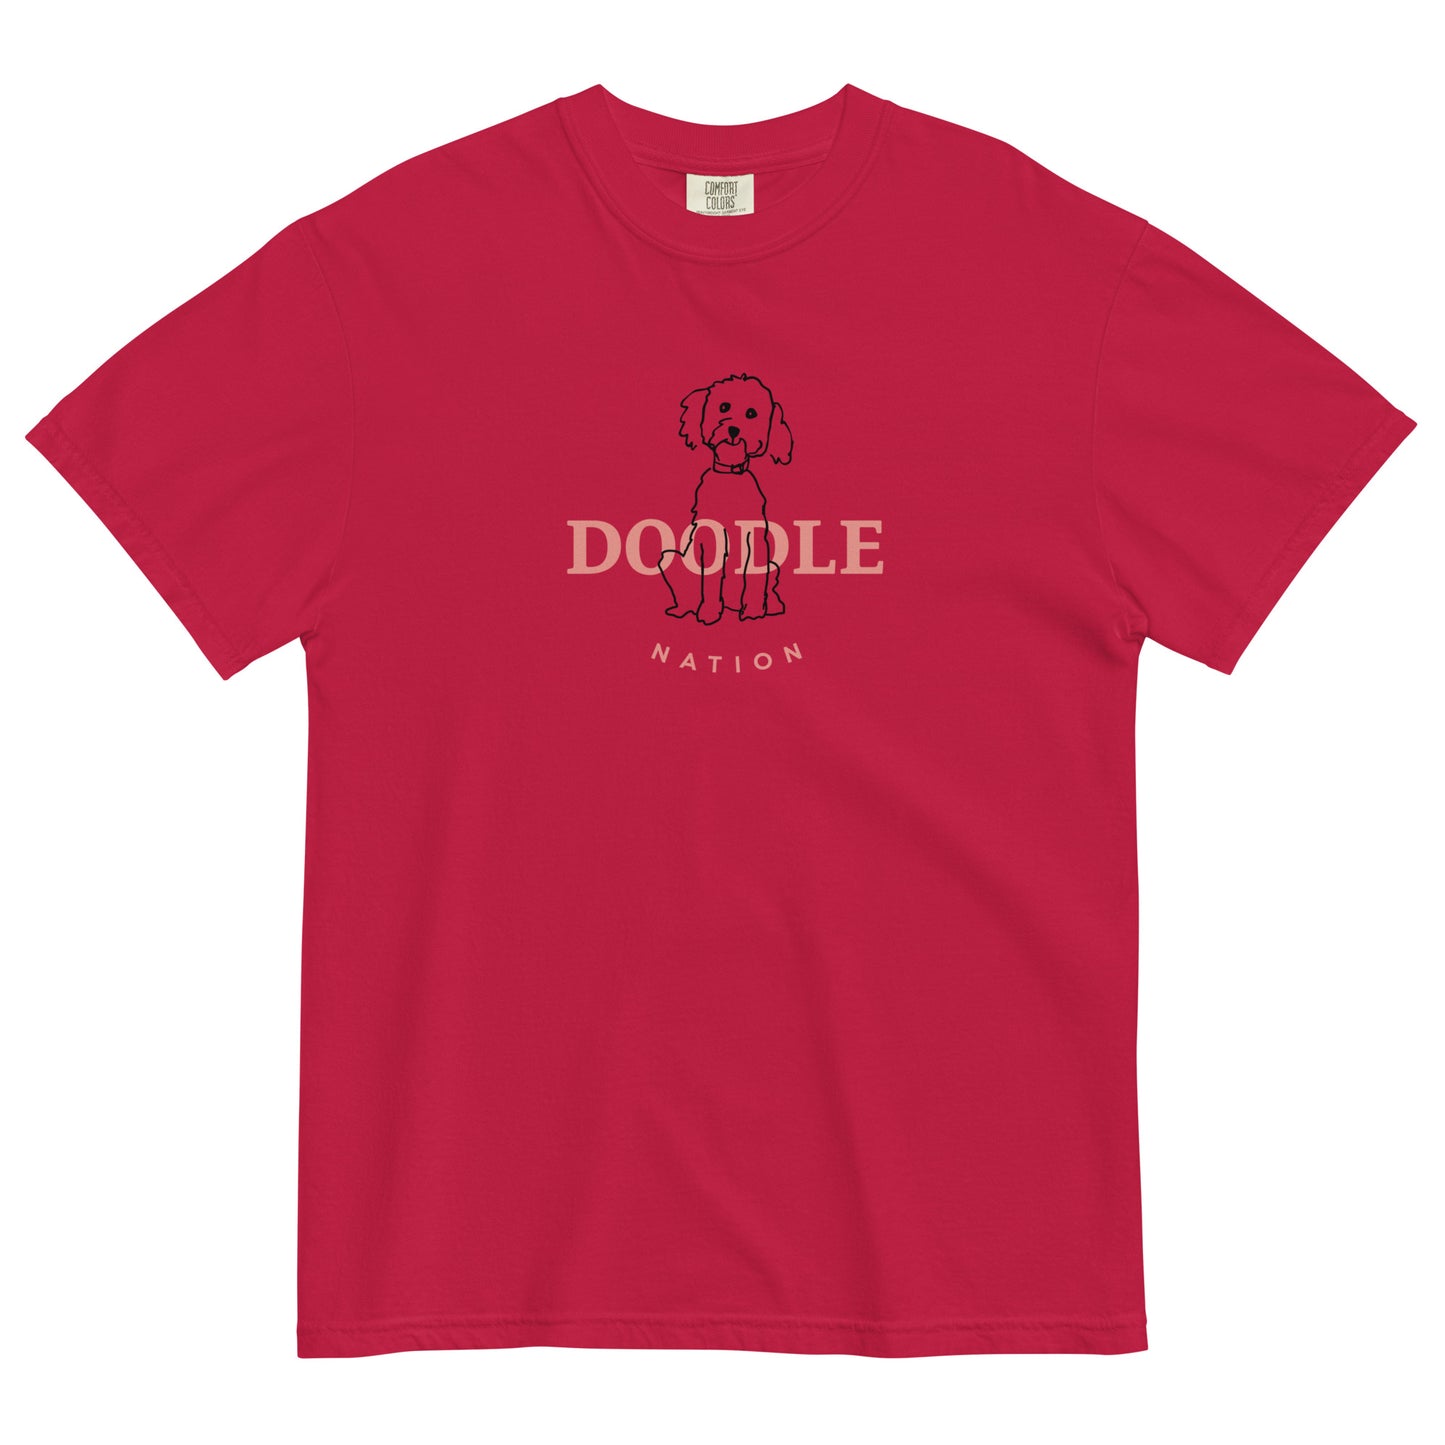 Goldendoodle comfort colors t-shirt with Goldendoodle and words "Doodle Nation" in red color